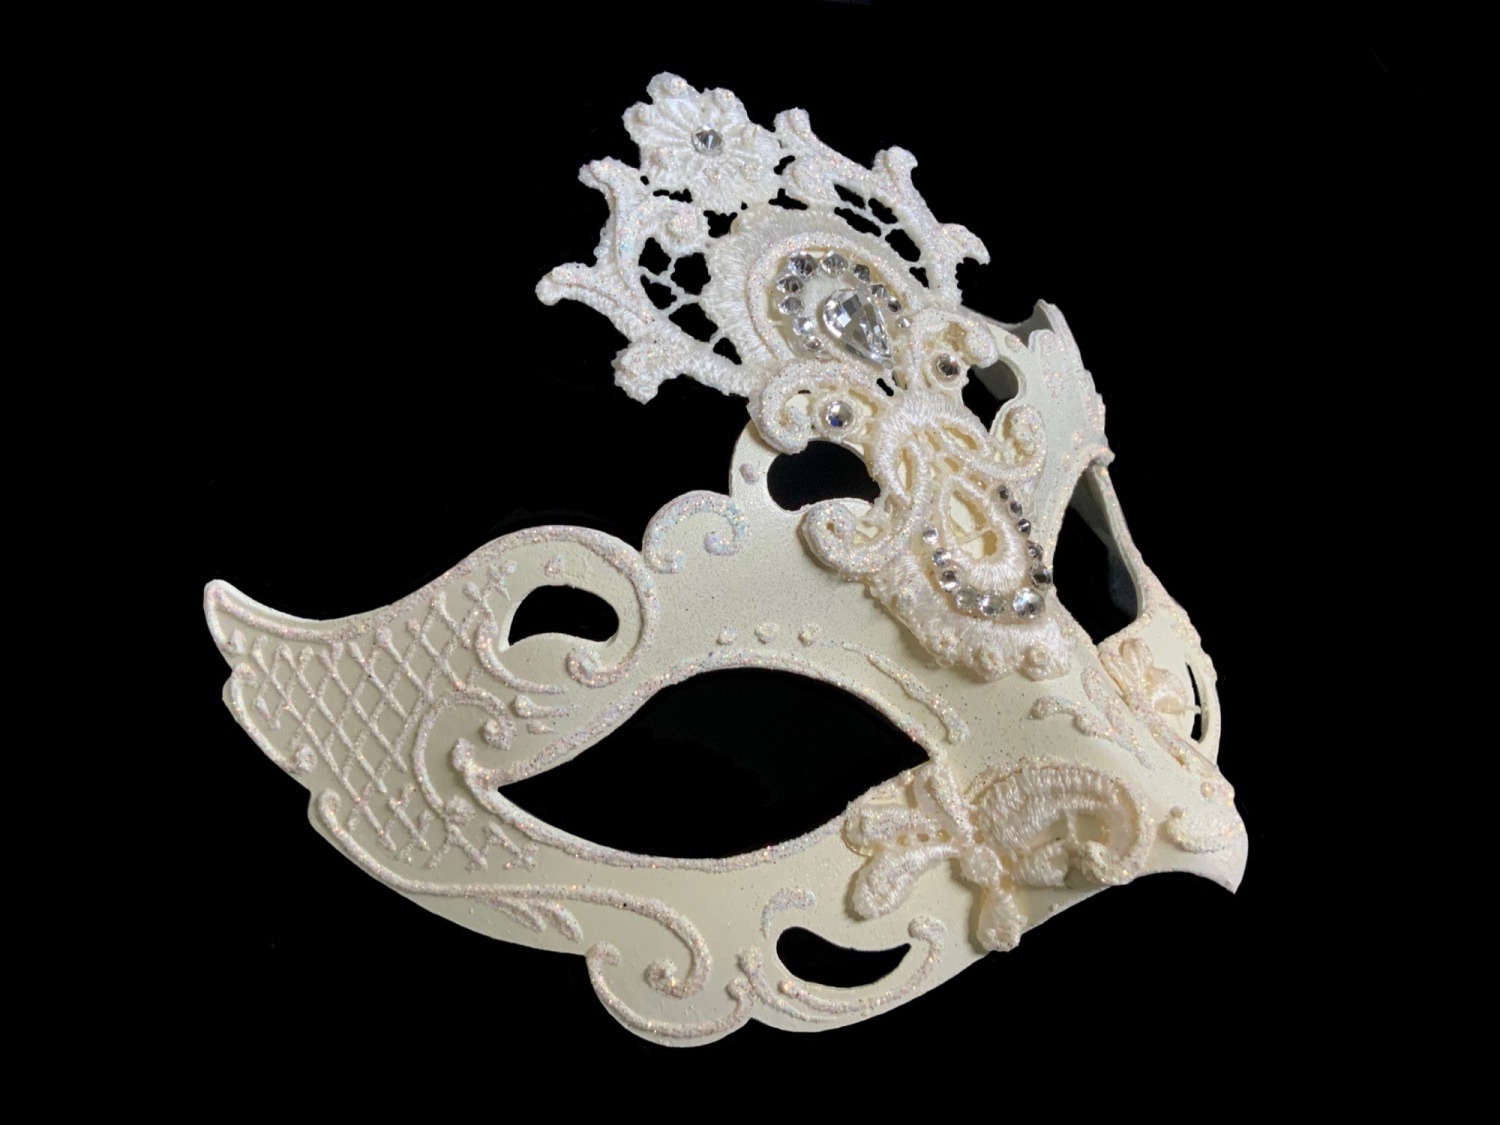 Masquerade Mask，Exquisite Lace Womens Costume Masks for Masquerade Ball， Simply Gorgeous! 